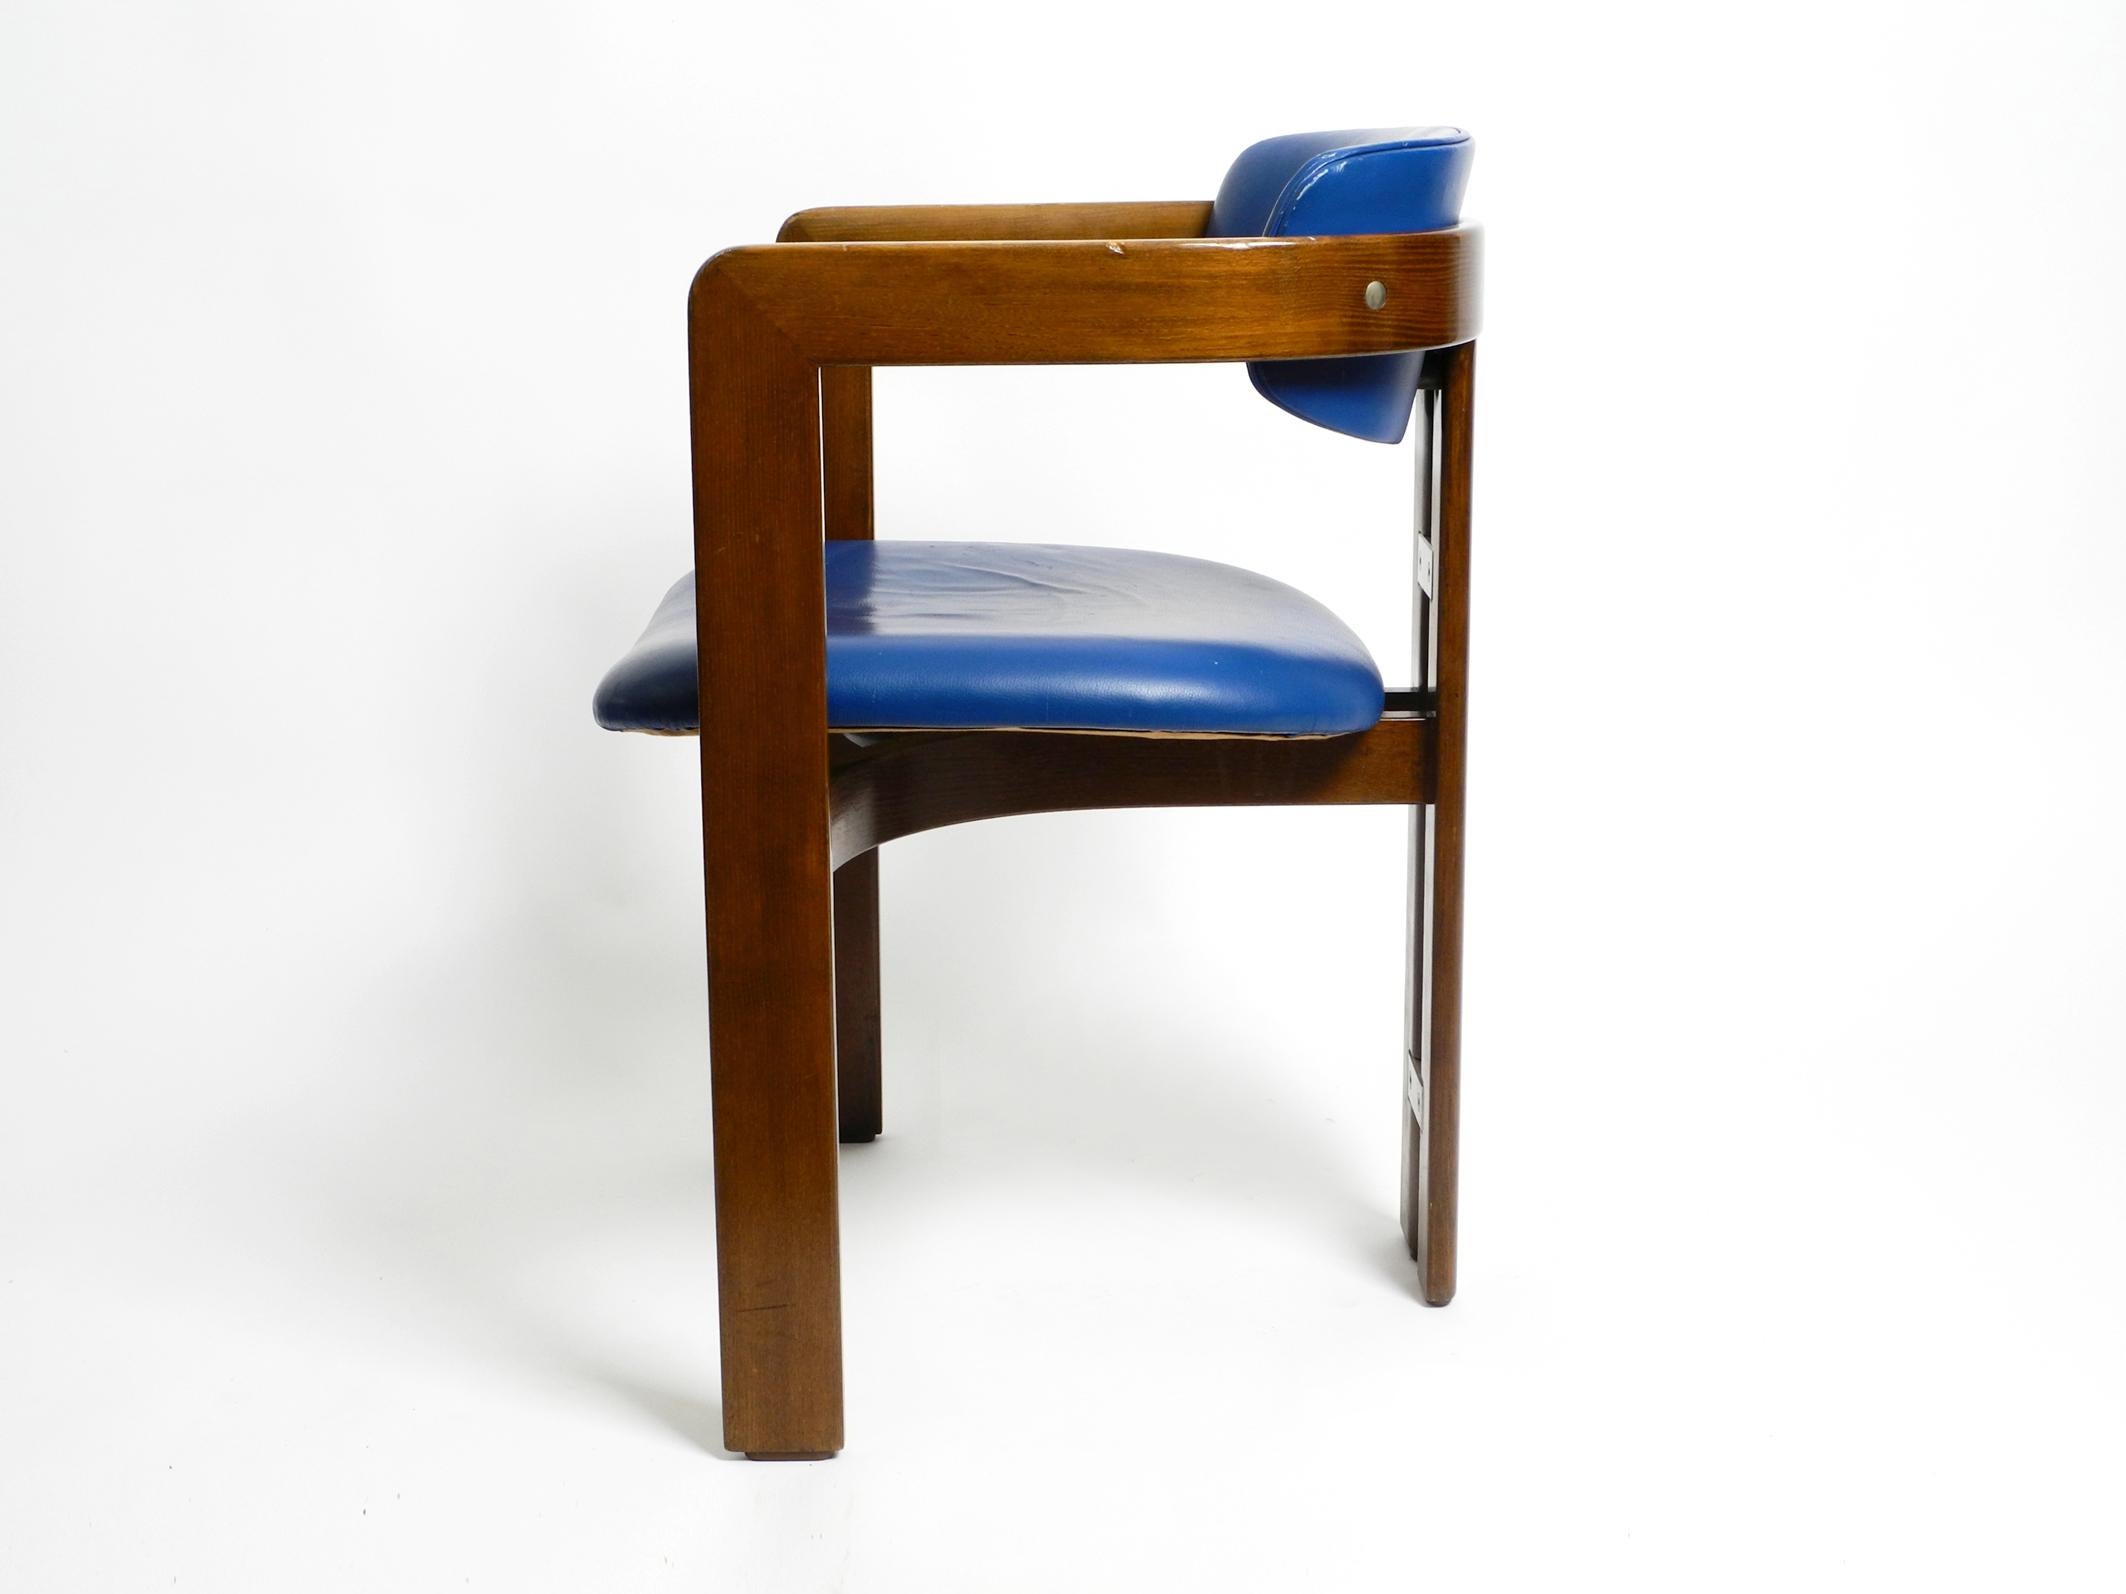 Italian Pamplona Chair by Augusto Savini for Pozzi in Blue Leather Upholstery